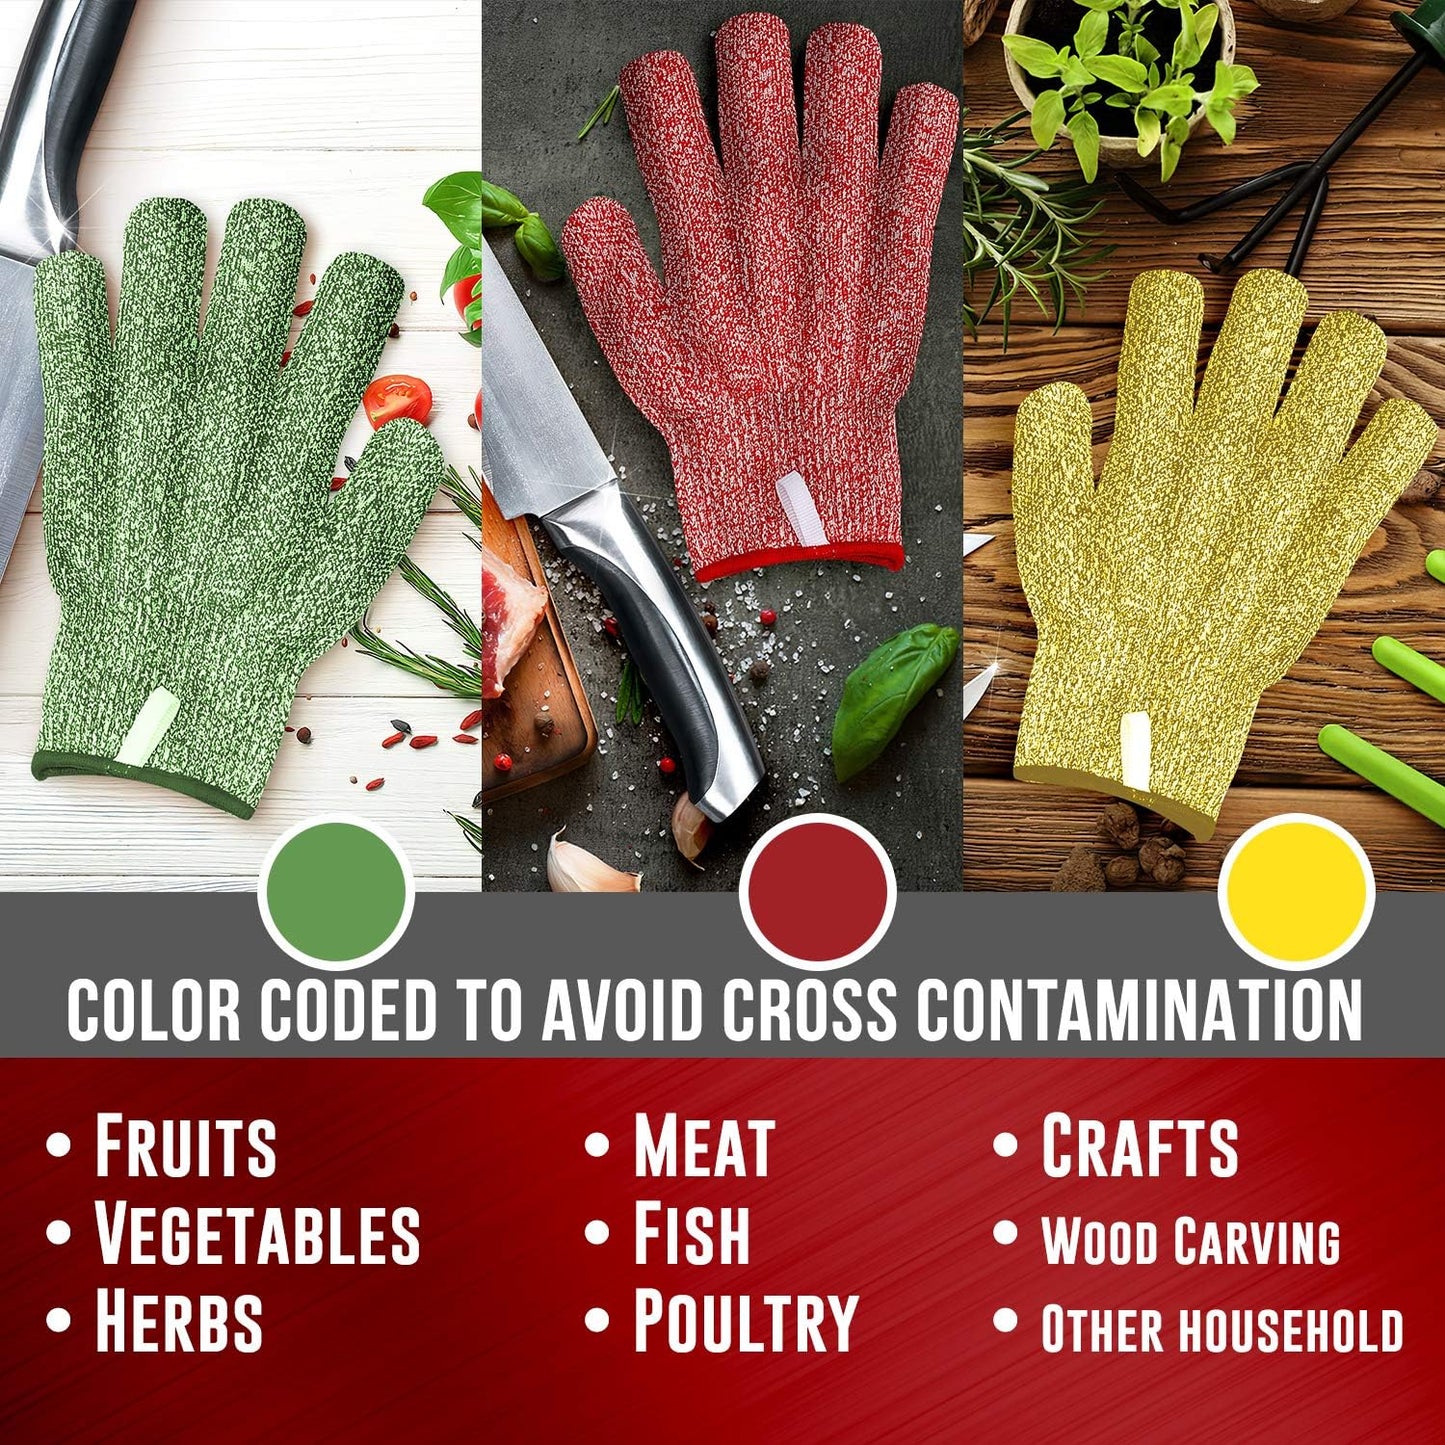 Cut Resistant Gloves - 3 Pack, Food Grade, Fits both hands, Level 5 Protection